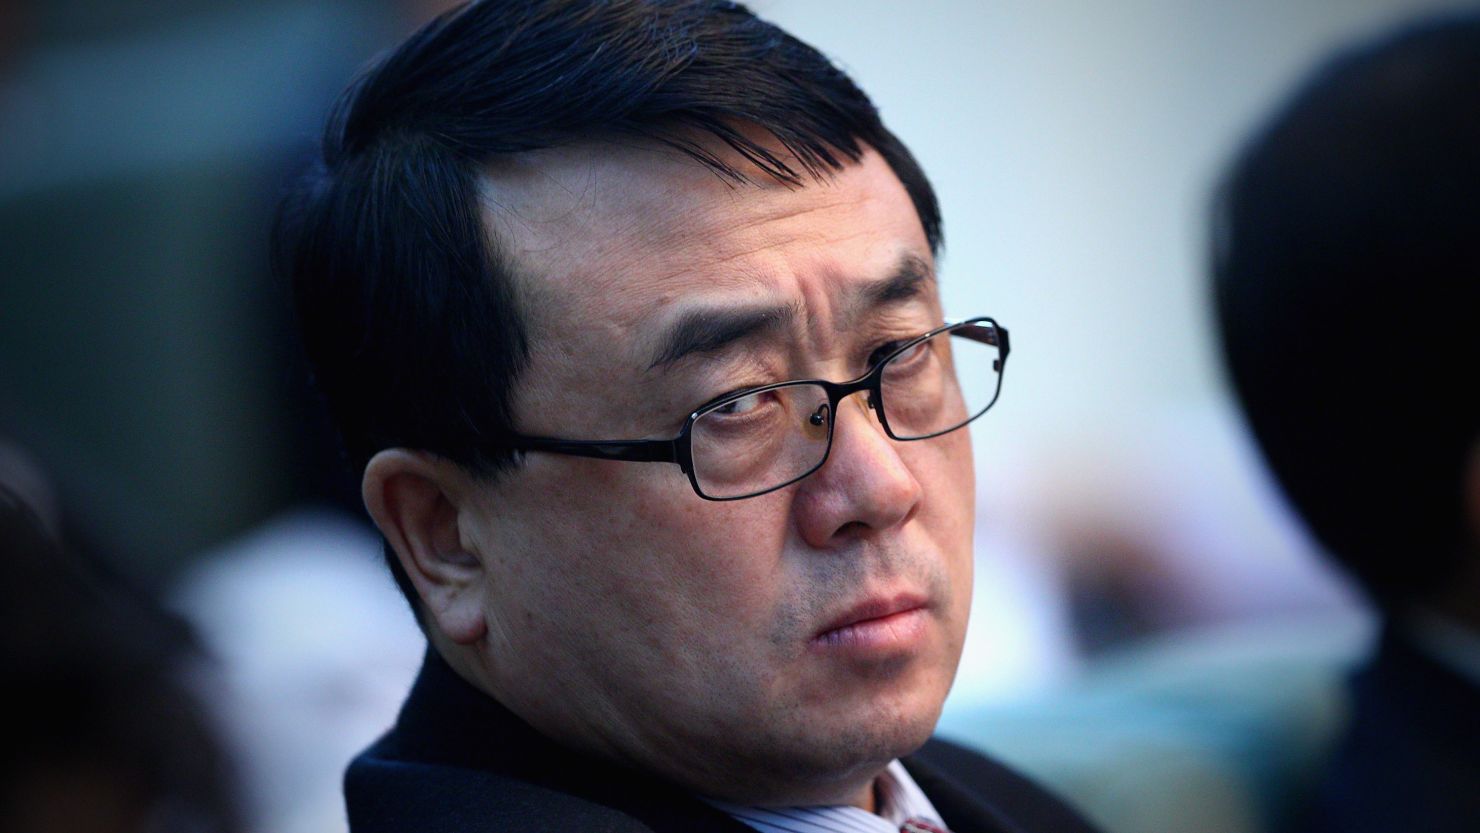 Wang Lijun pictured last year at the National People's Congress in Beijing.